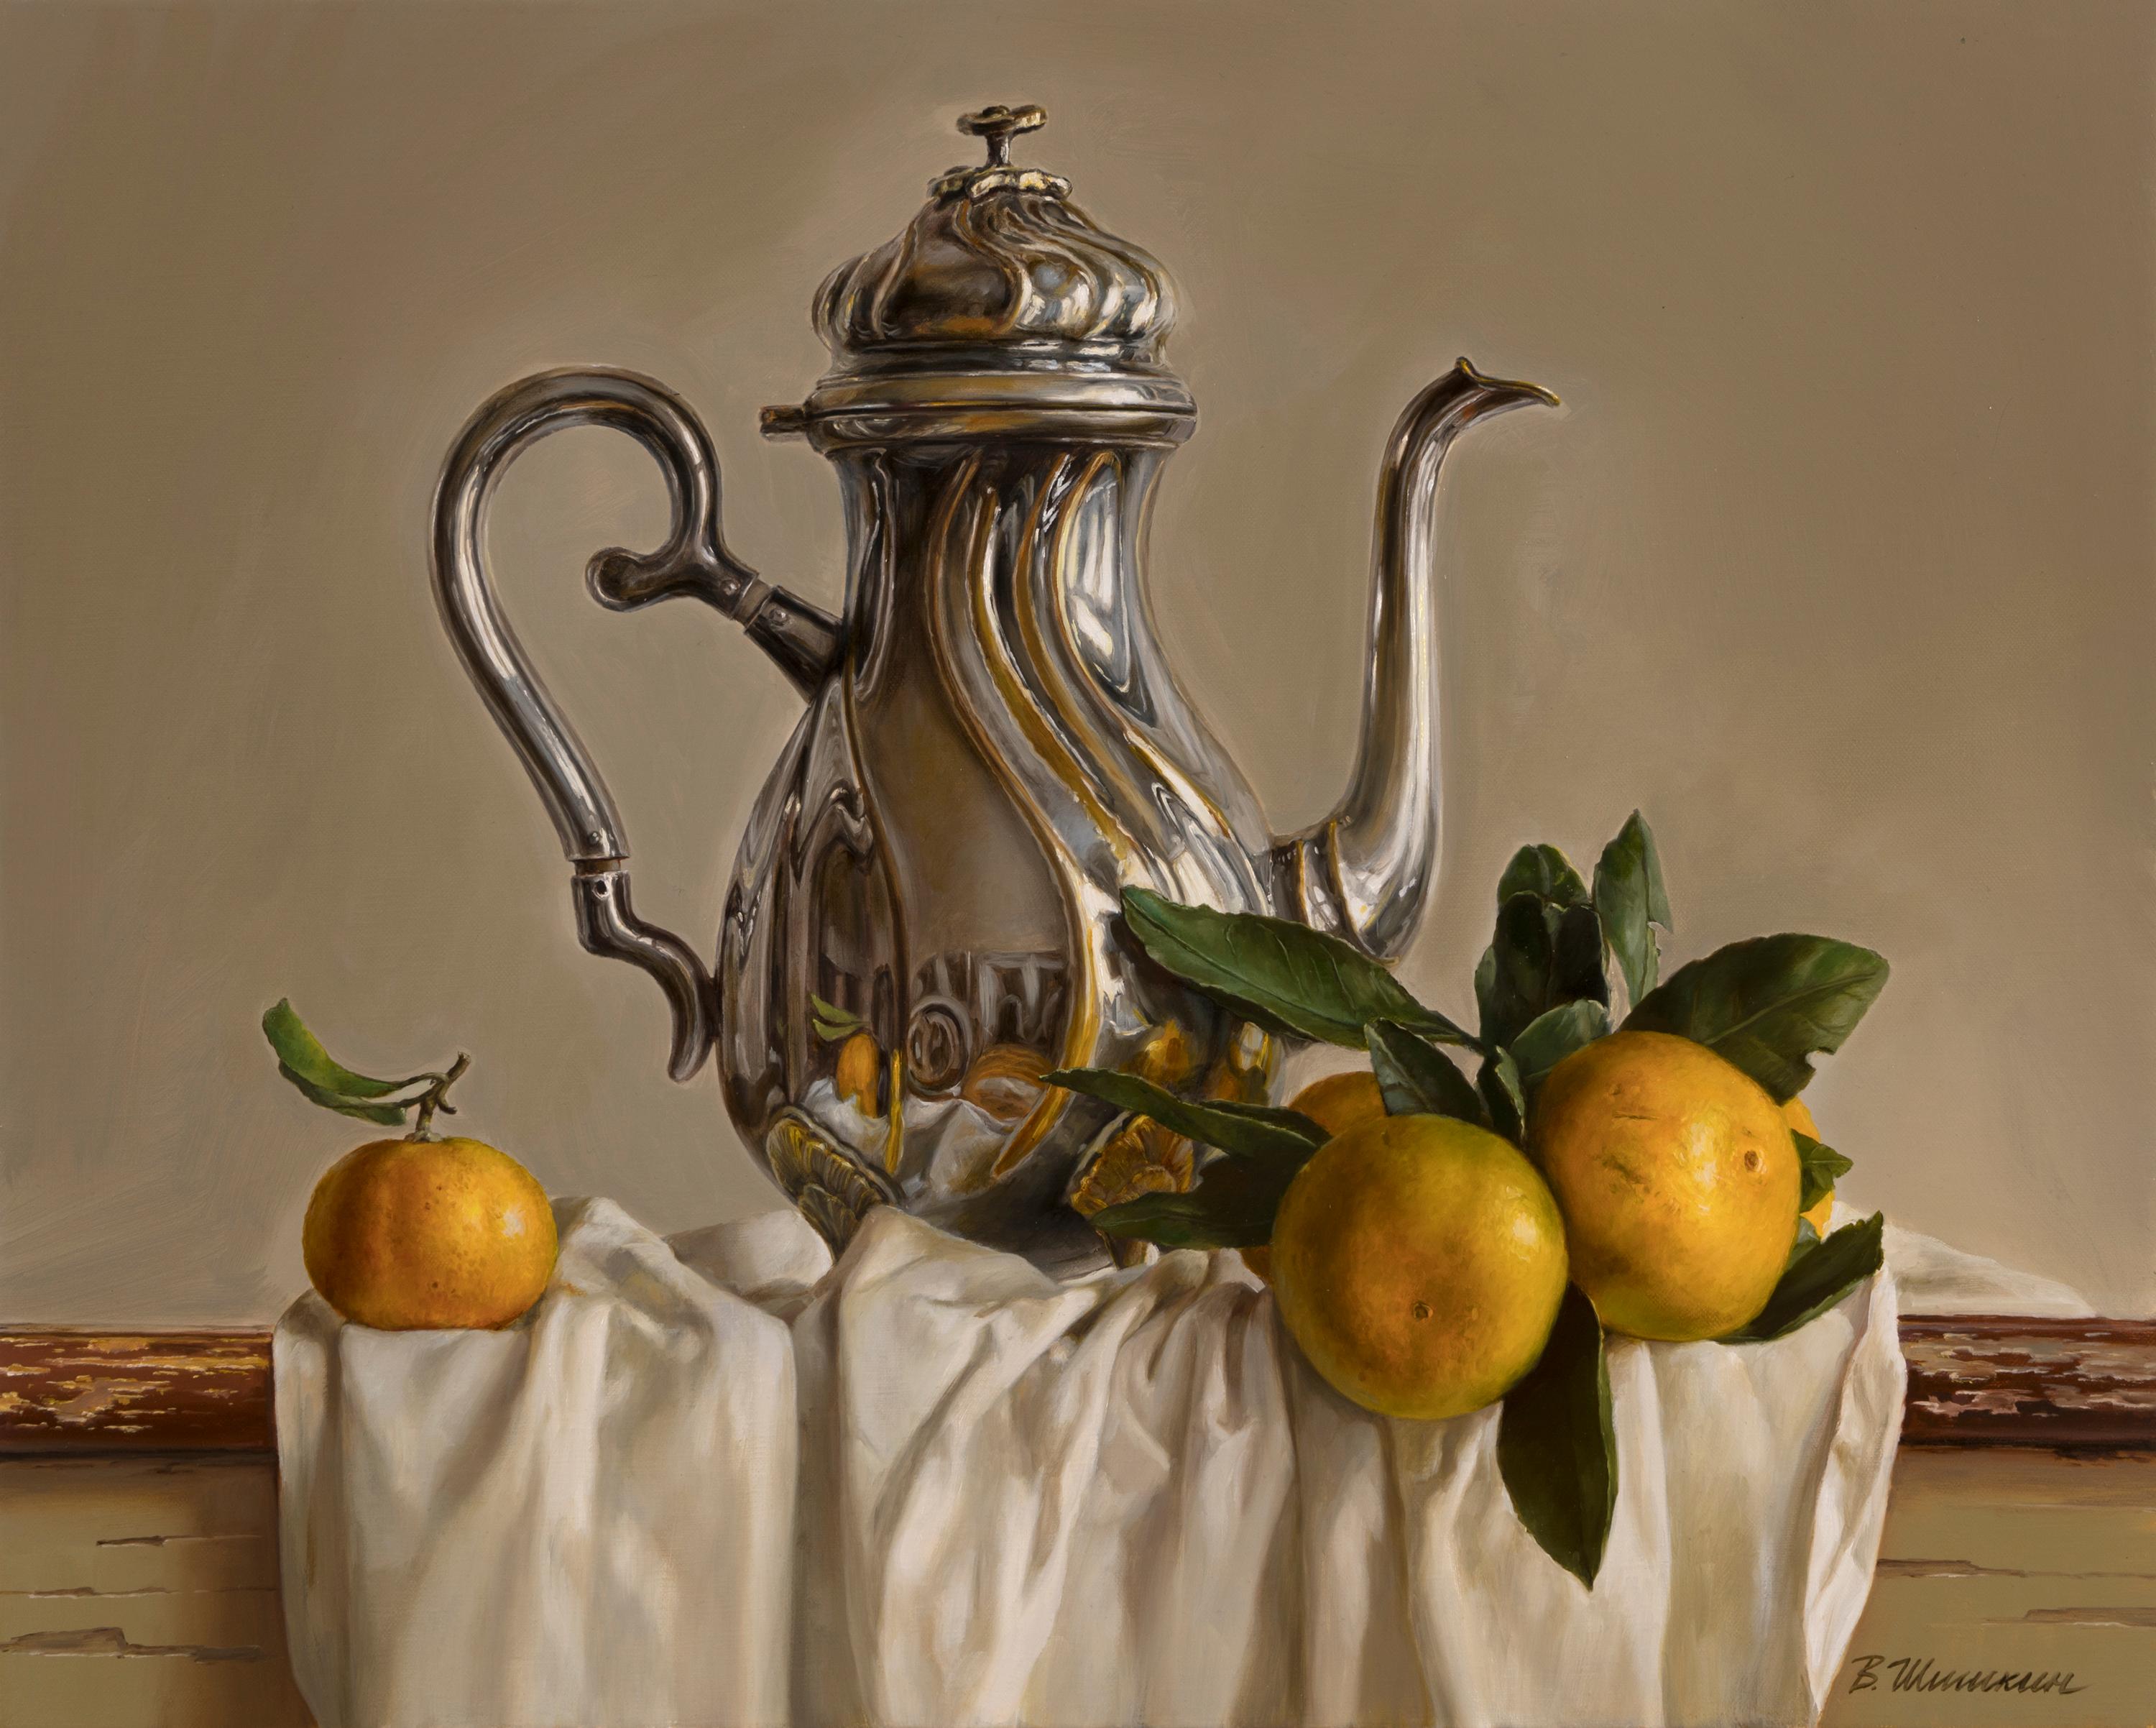 Kettle with mandarins